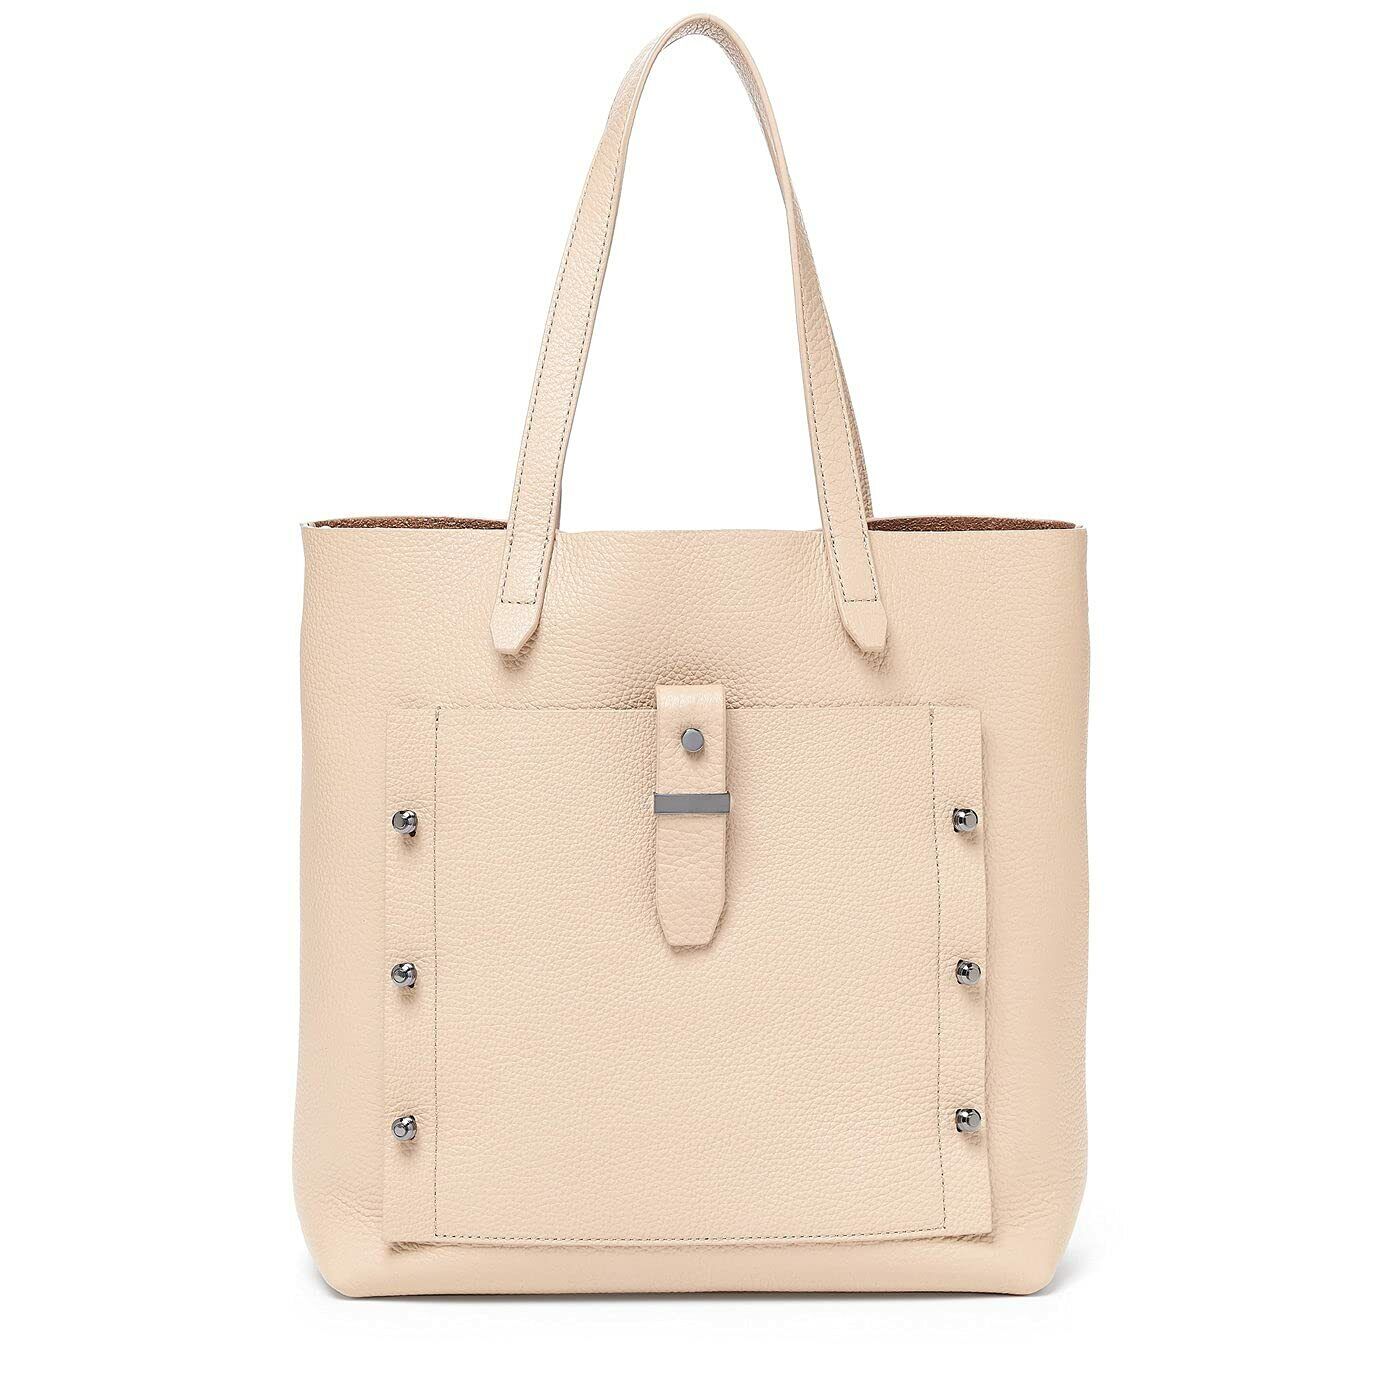 NWT Botkier Warren Woman\'s Leather Tote Beige Color MSRP: $228.00